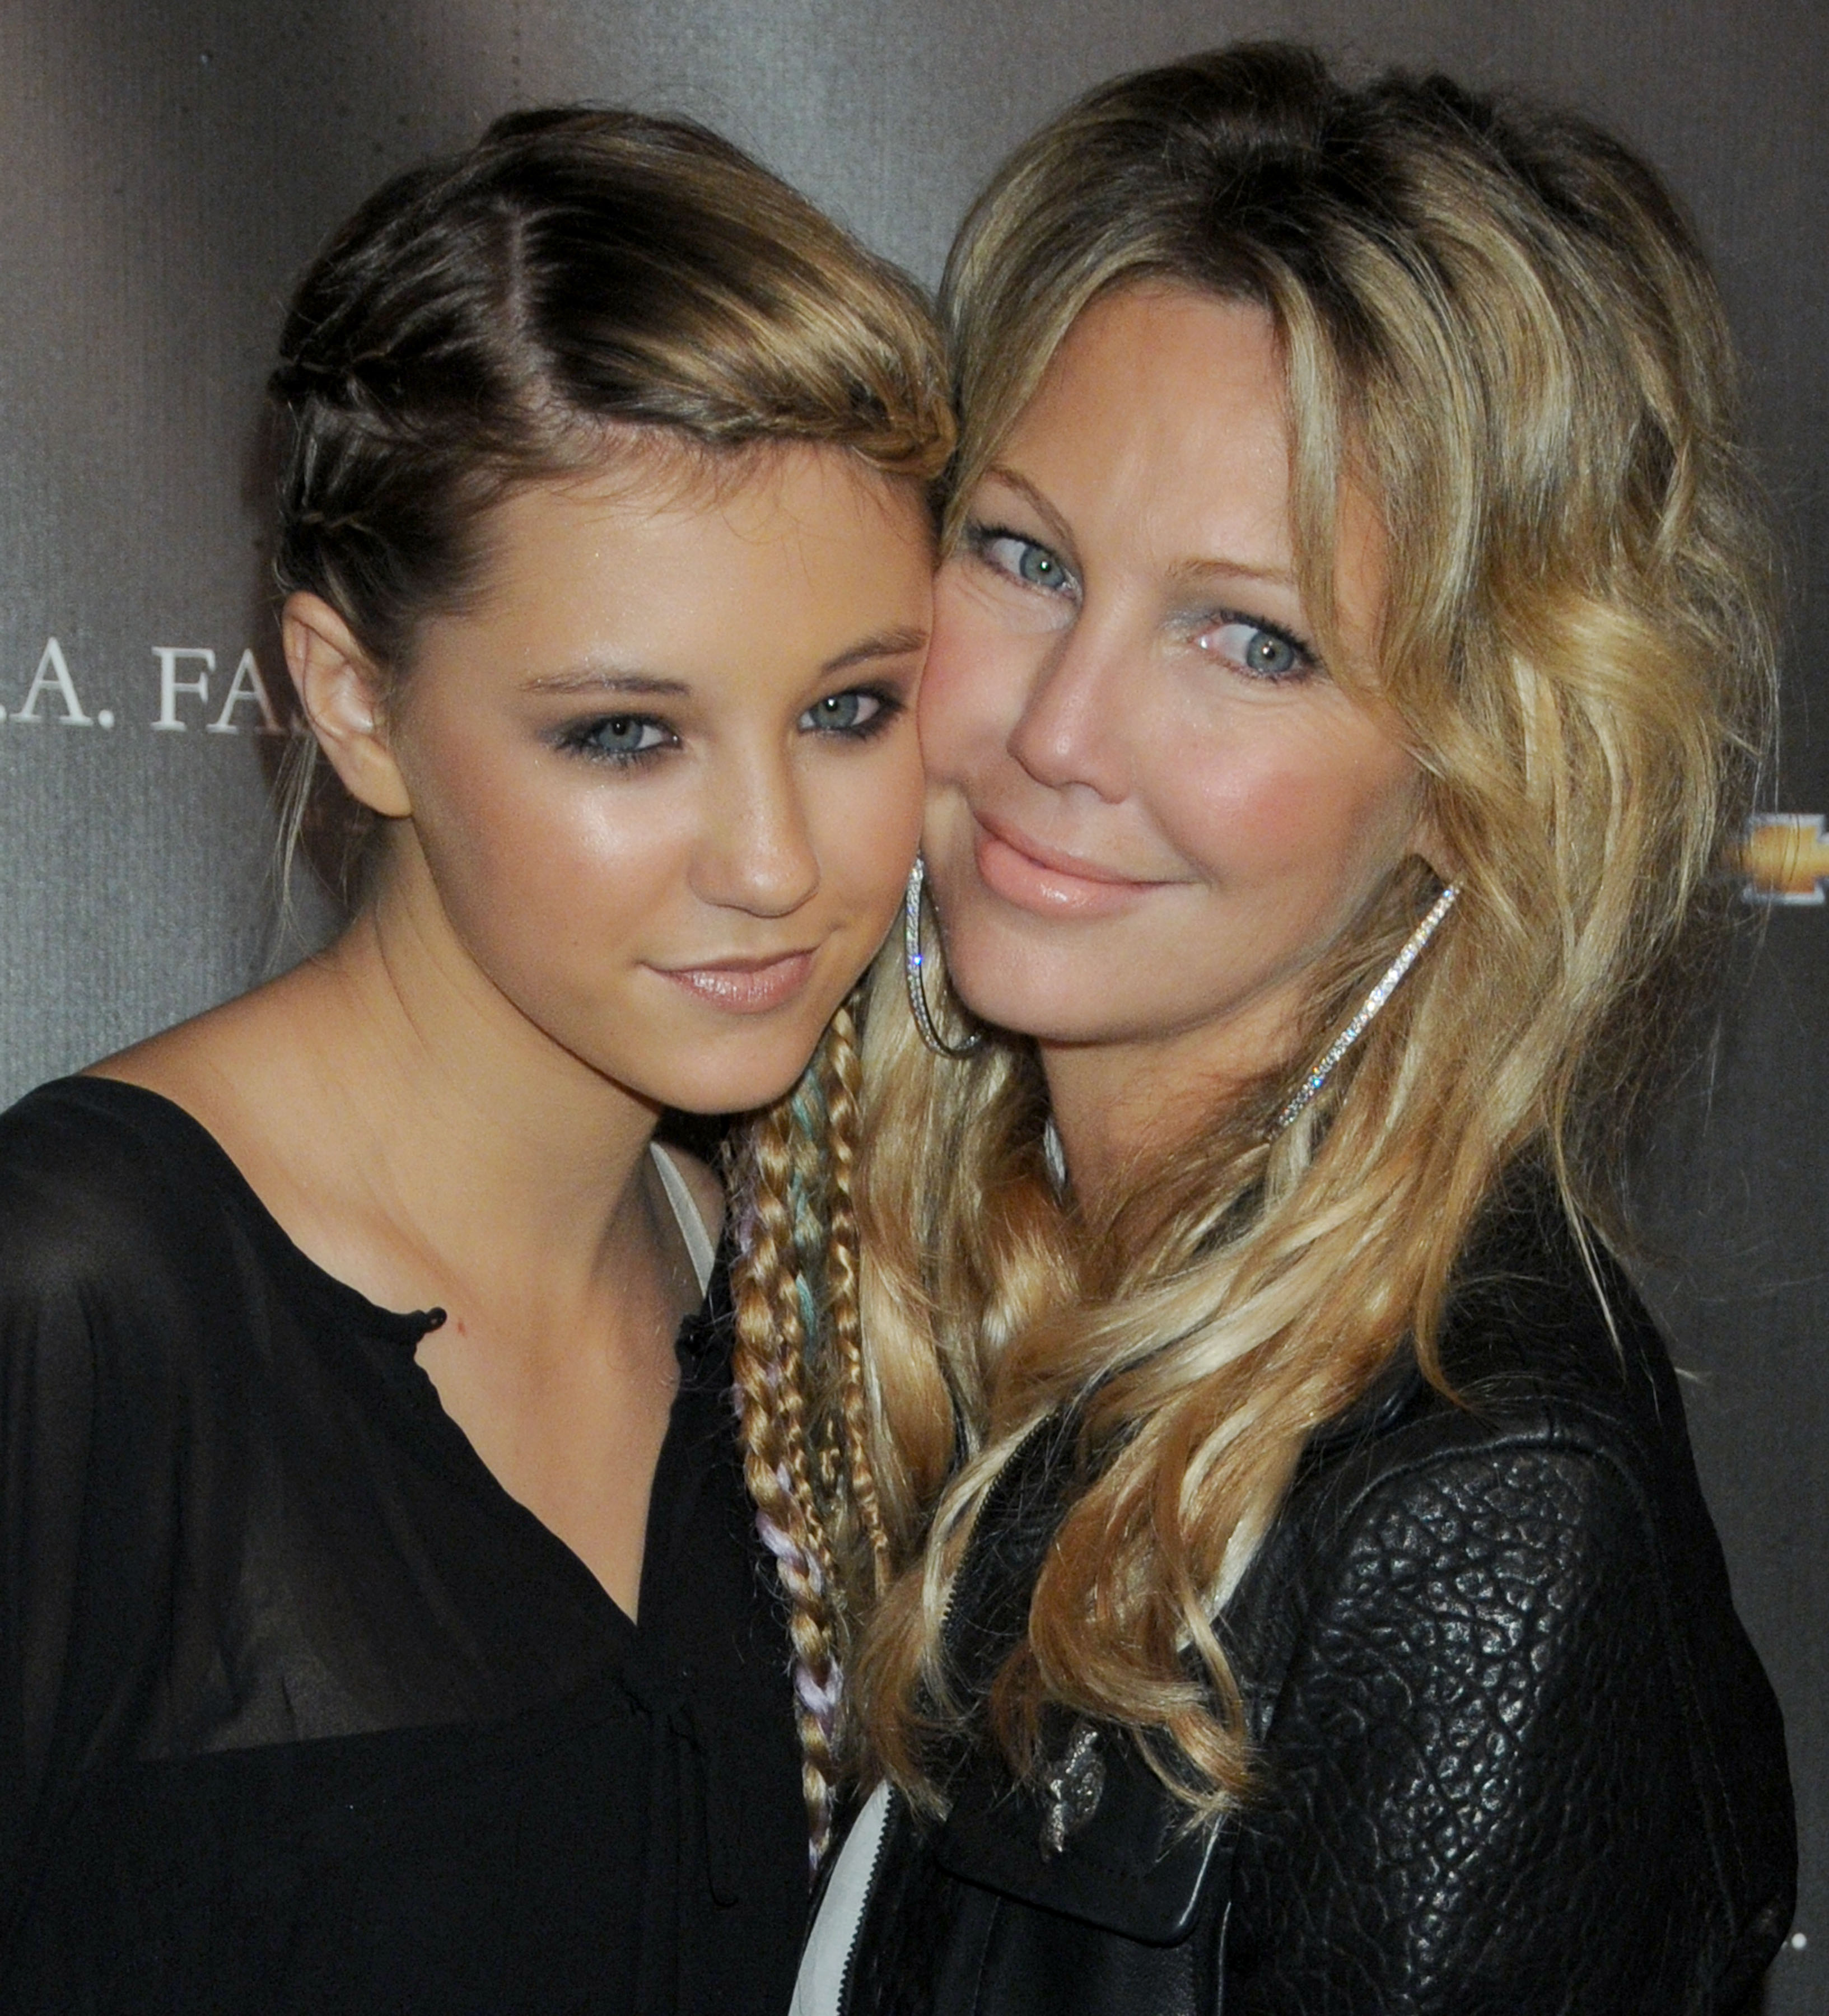 Ava Sambora and Heather Locklear at the White Trash Beautiful Spring 2011 Fashion Show in Los Angeles, California on October 17, 2010 | Source: Getty Image